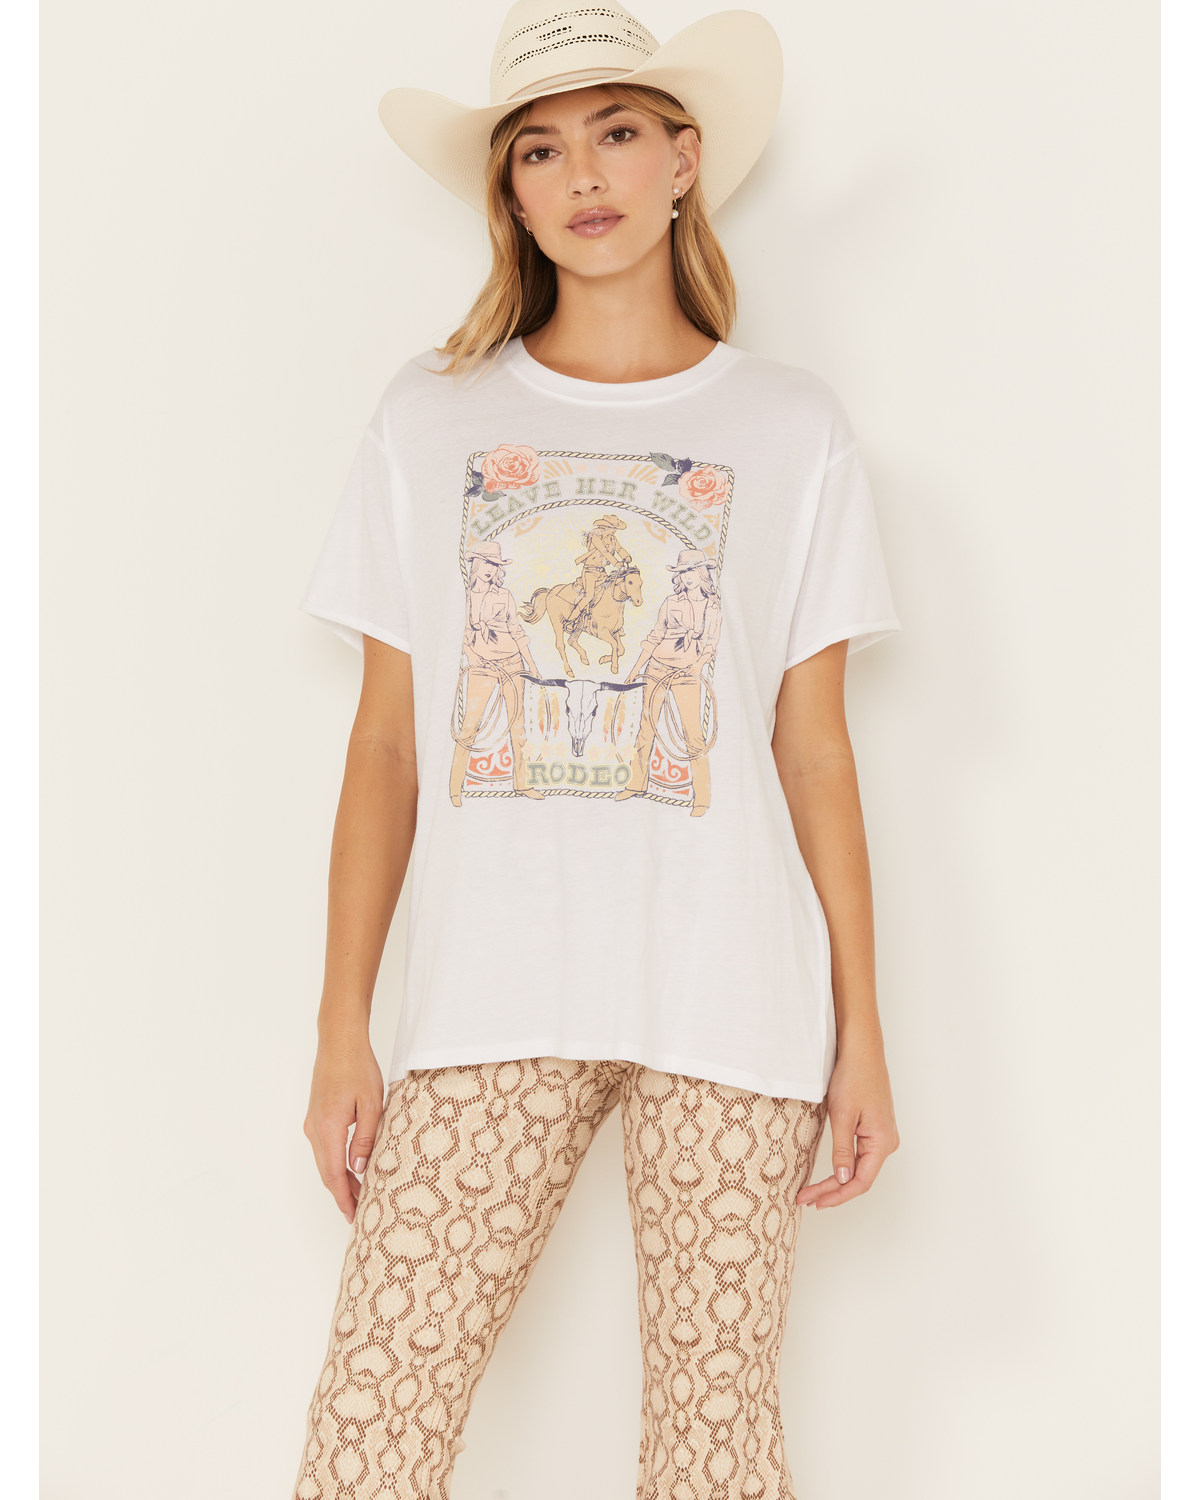 White Crow Women's Leave Her Wild Graphic Tee